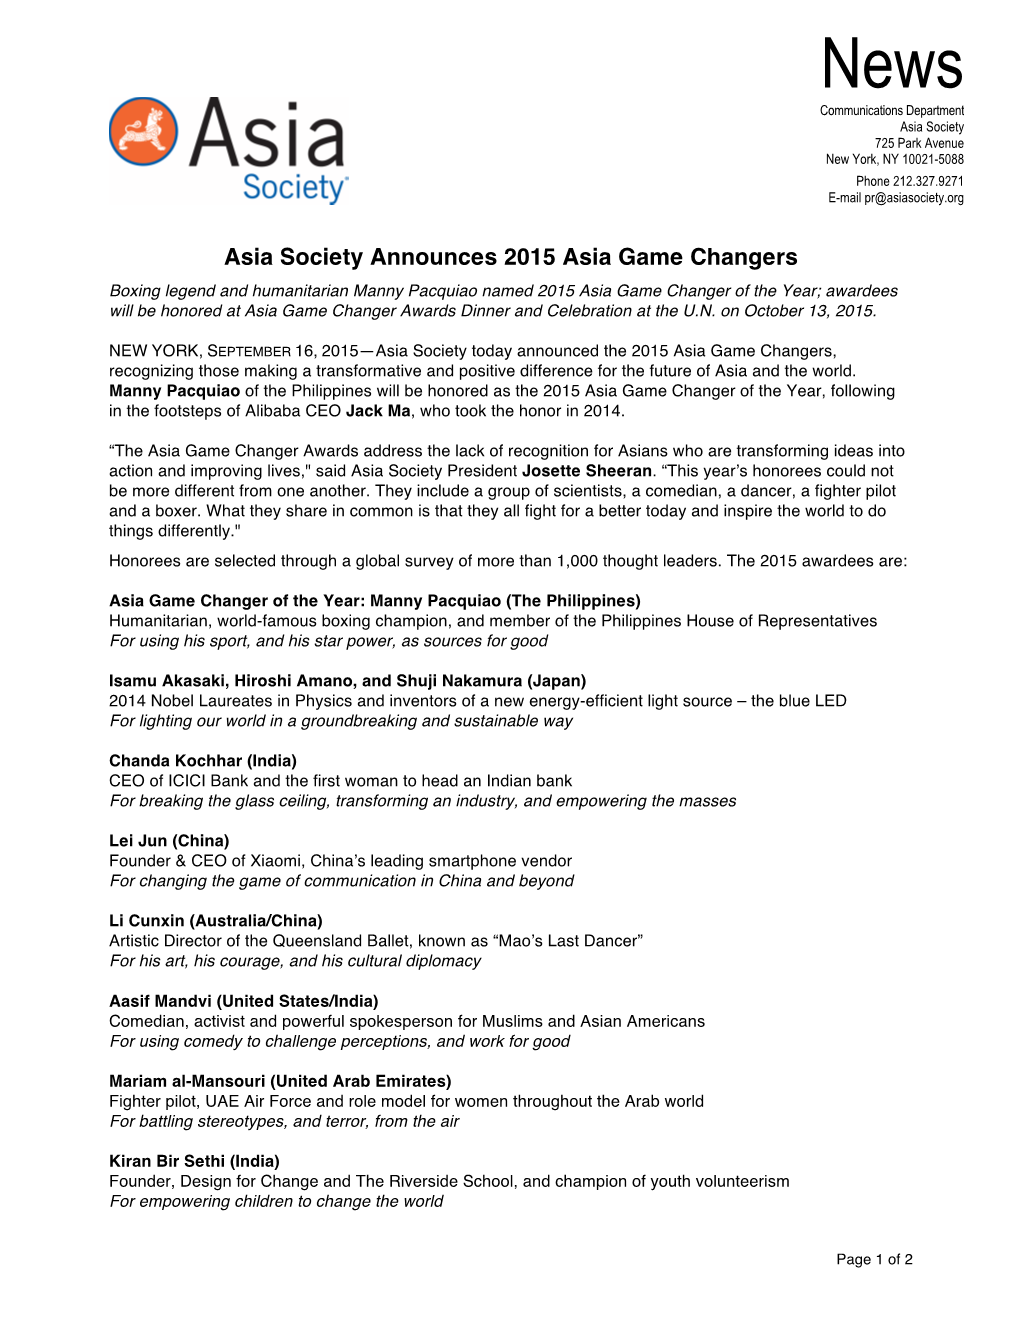 Asia Society Announces 2015 Asia Game Changers